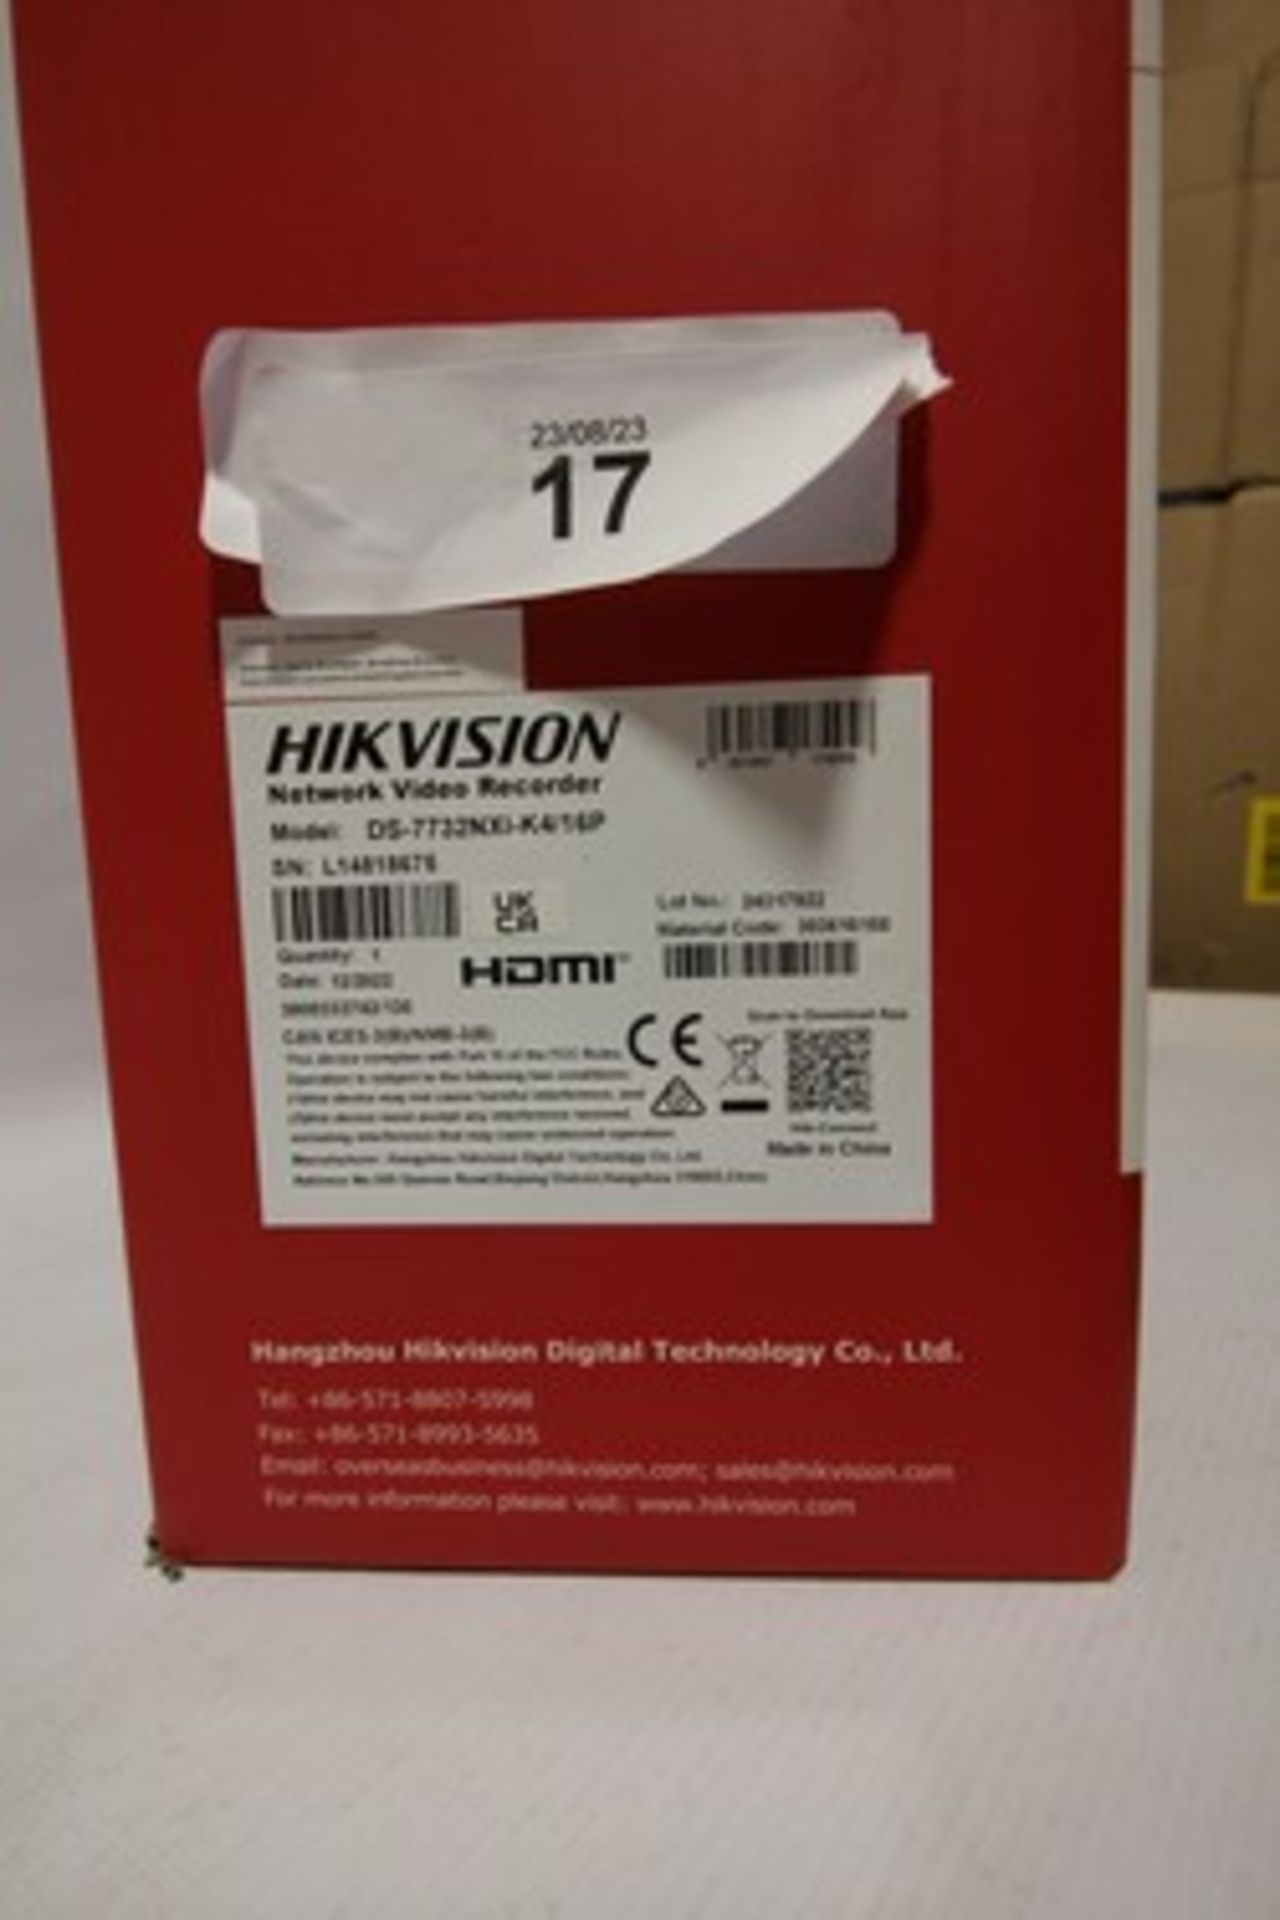 1 x Hikvision Acusense embedded NVR CCTV recorder, model No. DS-7732NXI-K4/16P - sealed new in - Image 2 of 3